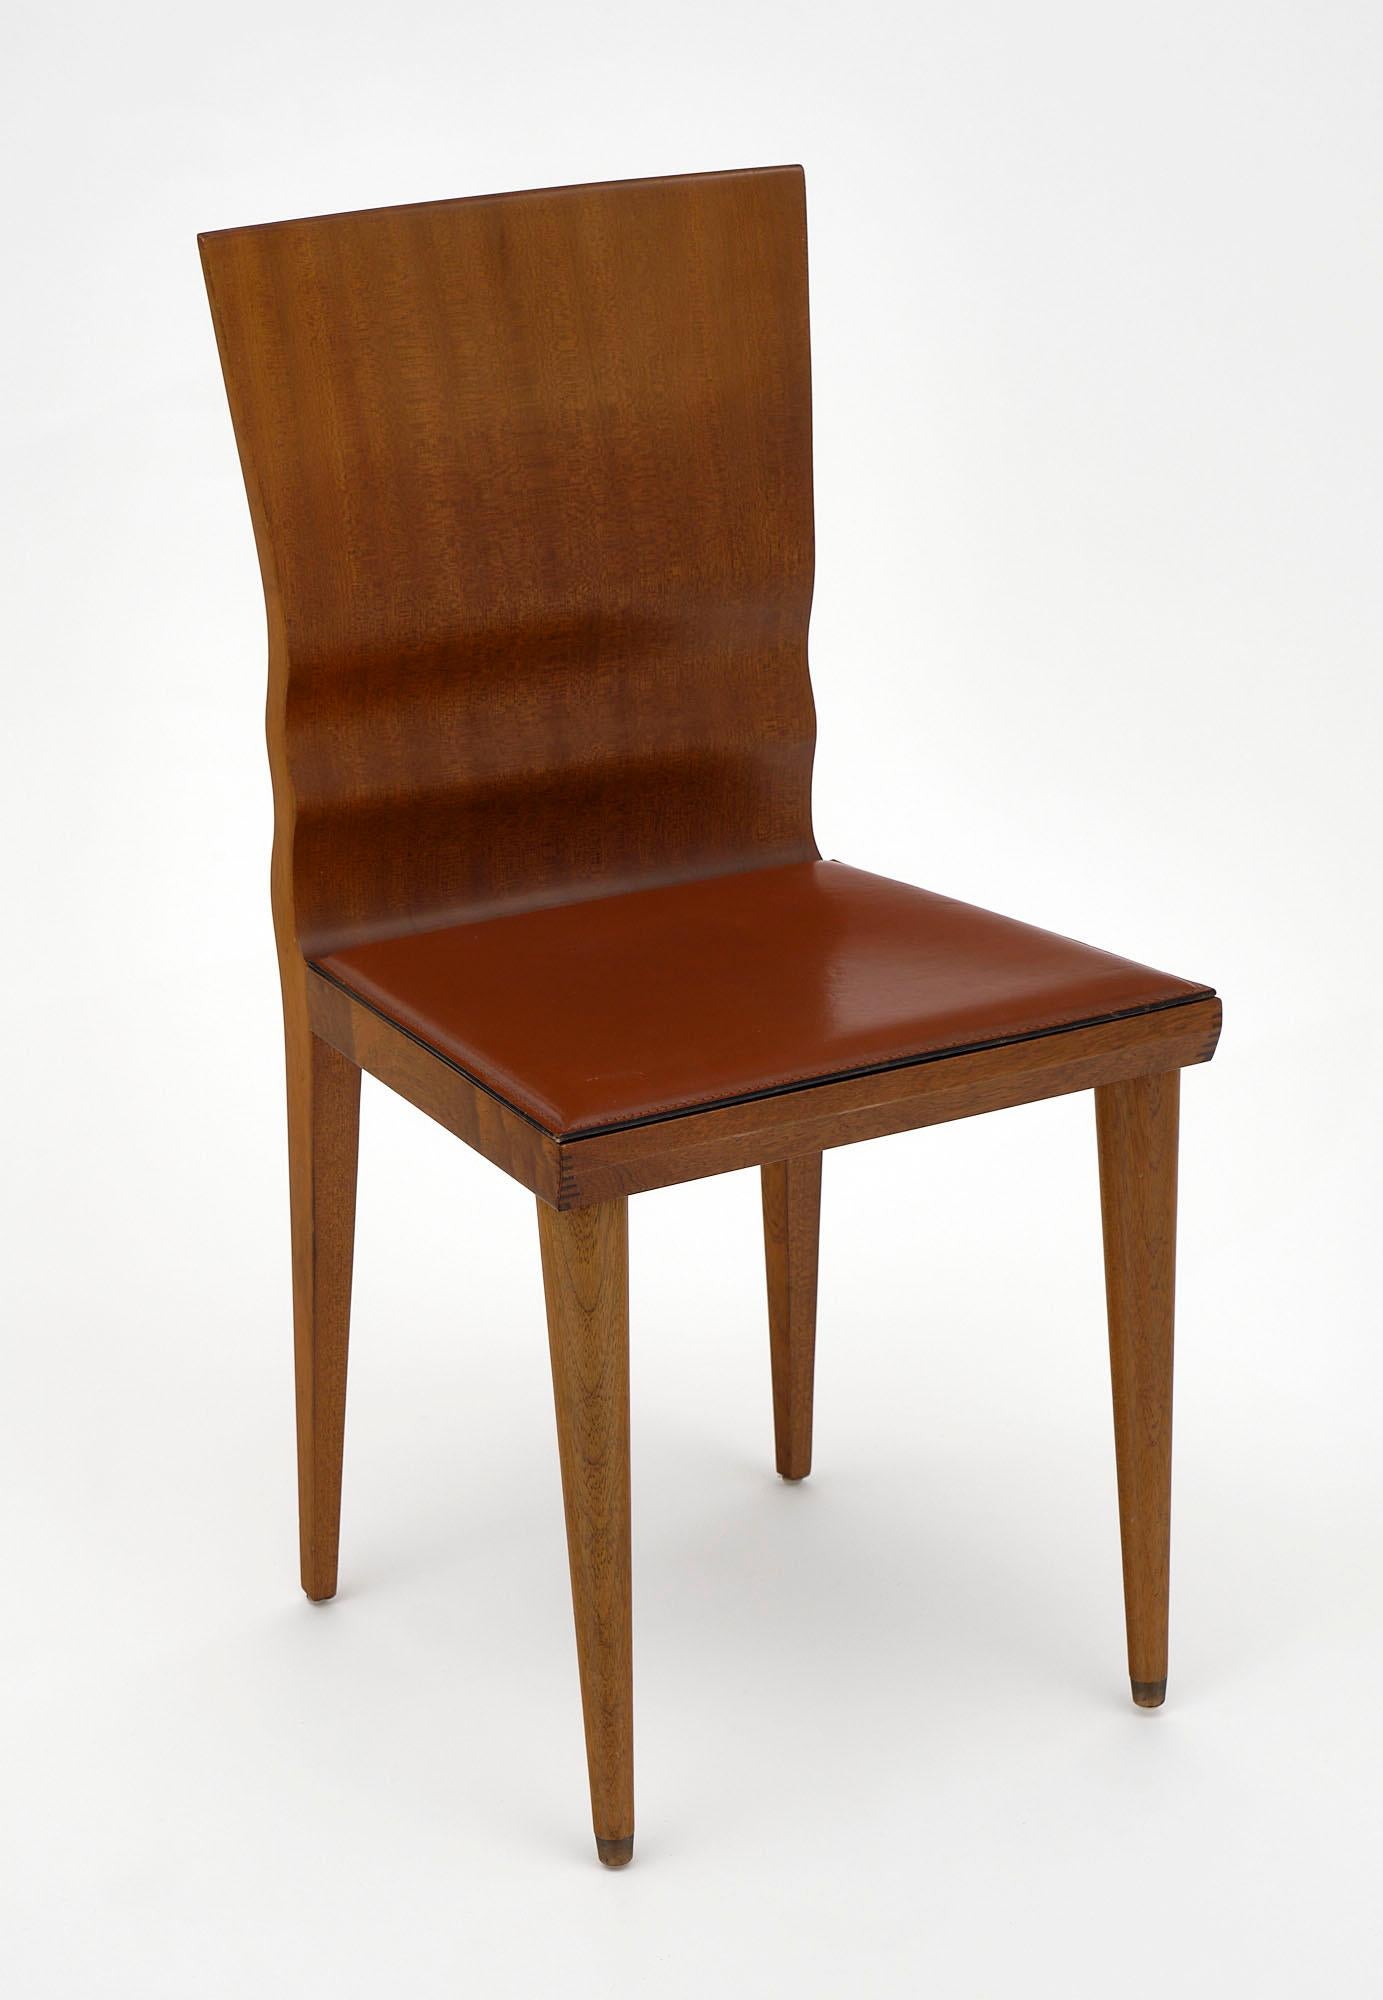 Set of four chairs from Italy designed by William Sawaya for Sawaya and Maroni made of solid walnut with padded leatherette seats. They have a beautiful undulating back and tapered legs.